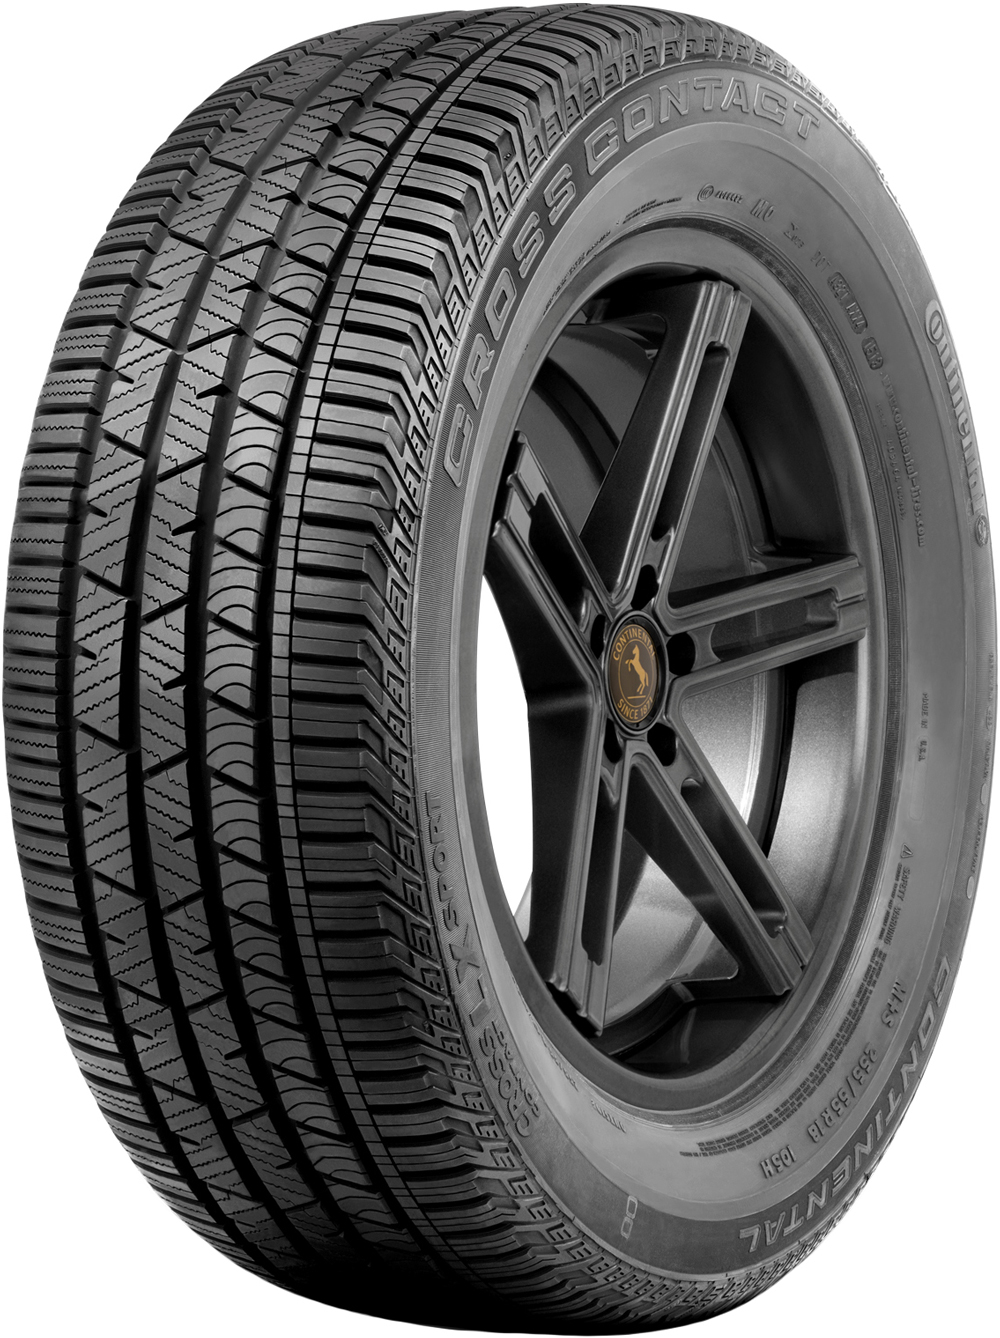 Anvelope auto CONTINENTAL Conti Cross Contact LX Sport 225/60 R17 99